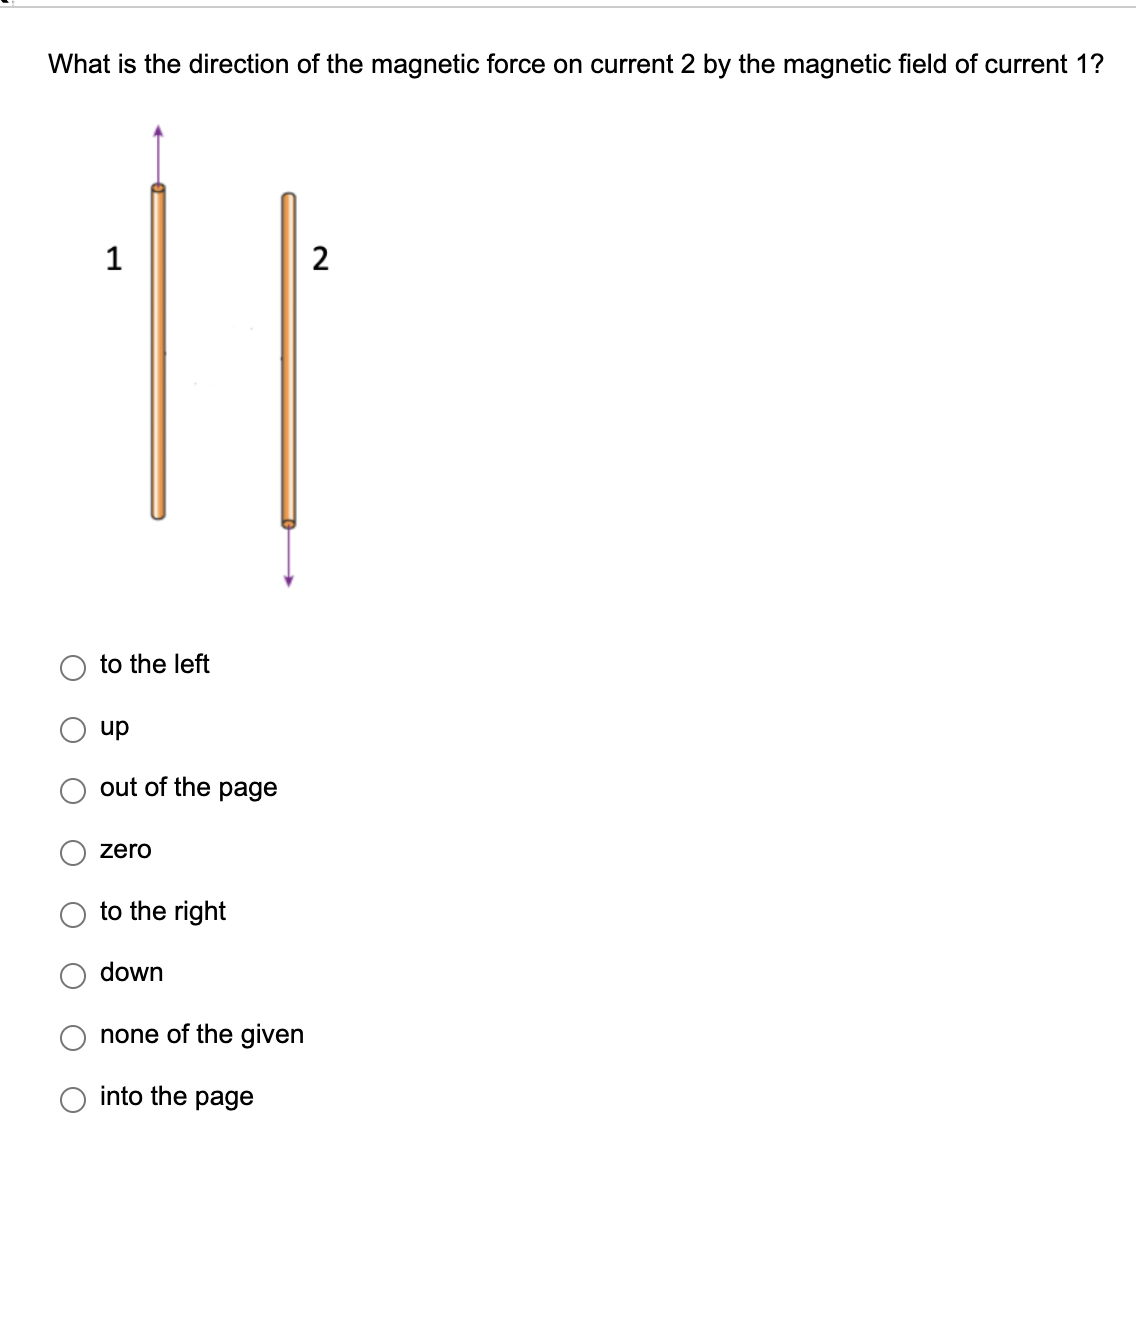 What is the direction of the magnetic force on current 2 by the magnetic field of current 1?
1
to the left
up
out of the page
zero
to the right
down
none of the given
into the page
2